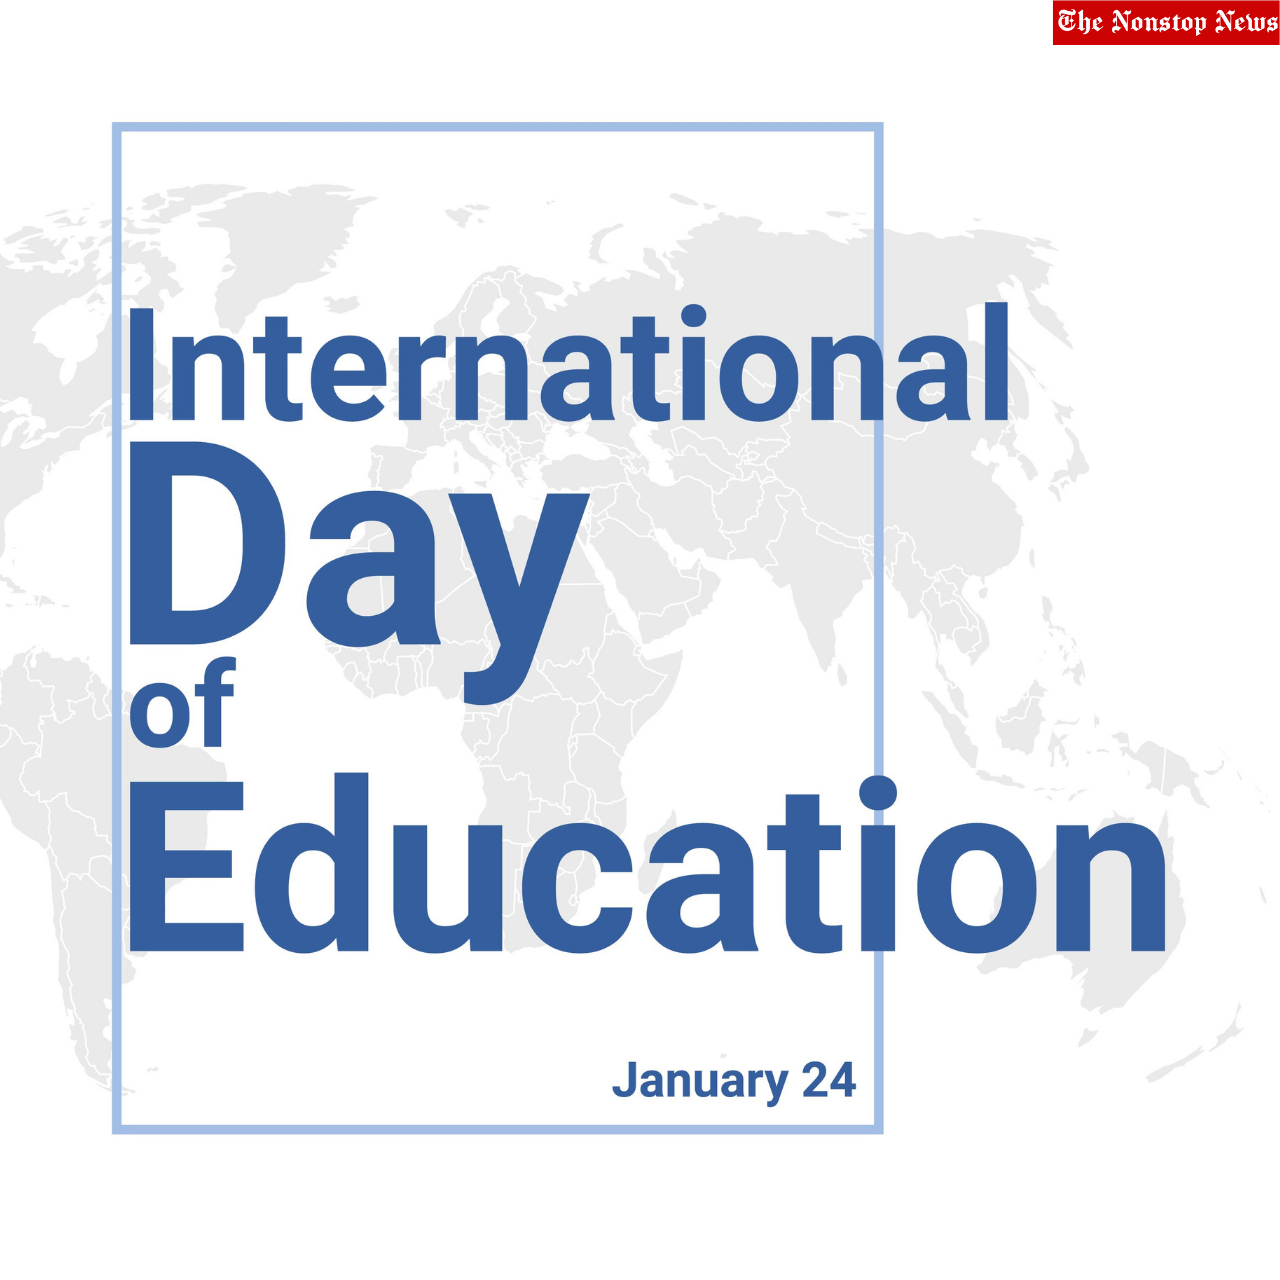 International Day of Education 2022 Theme, History, Significance, Importance, Activities, and more